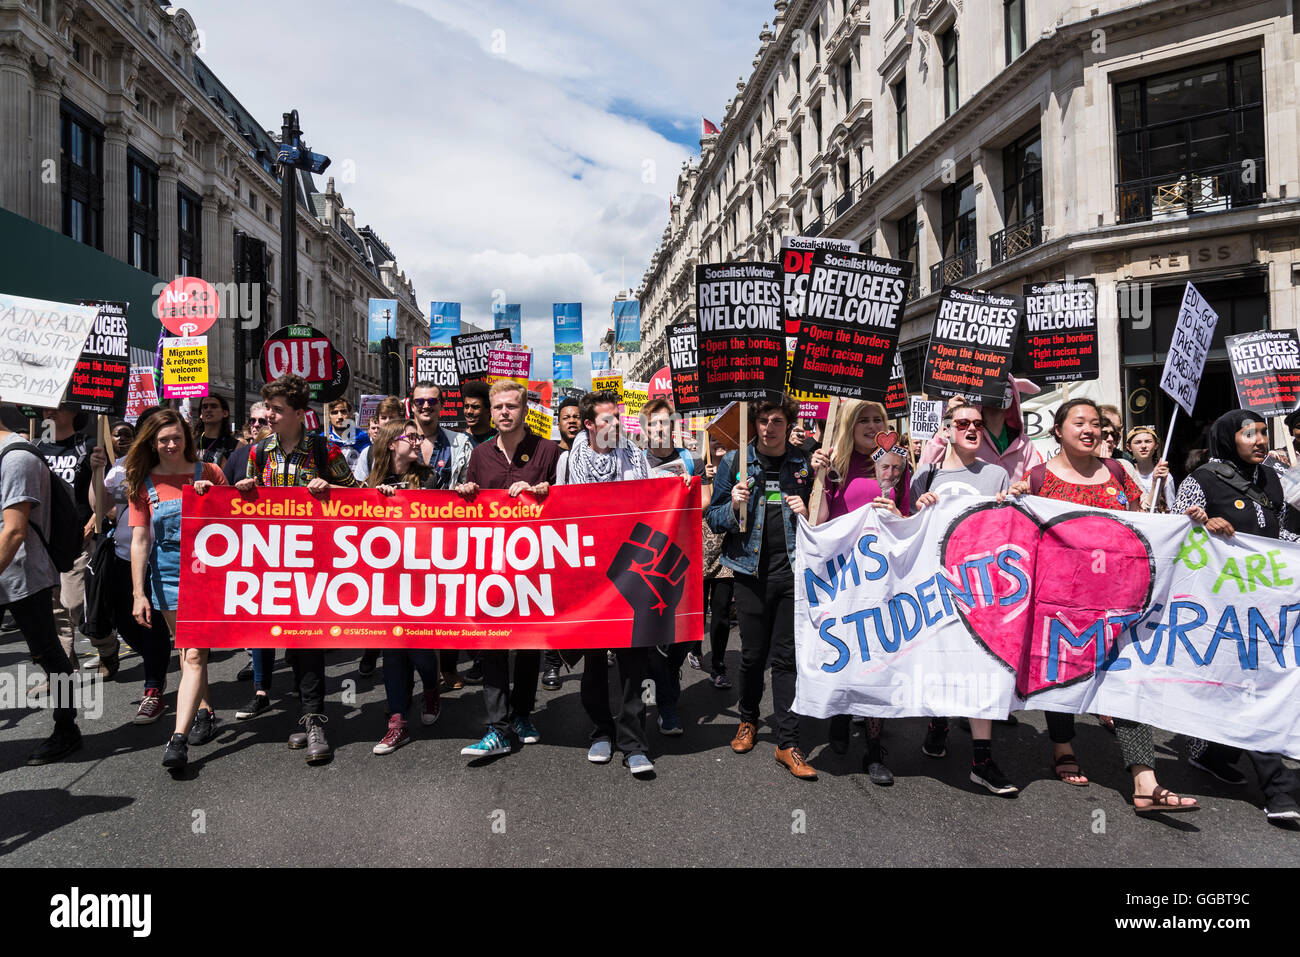 One Solution: Revolution, No More Austerity - No To Racism - Tories Must Go, demonstration organised by Peoples Assembly, Saturd Stock Photo